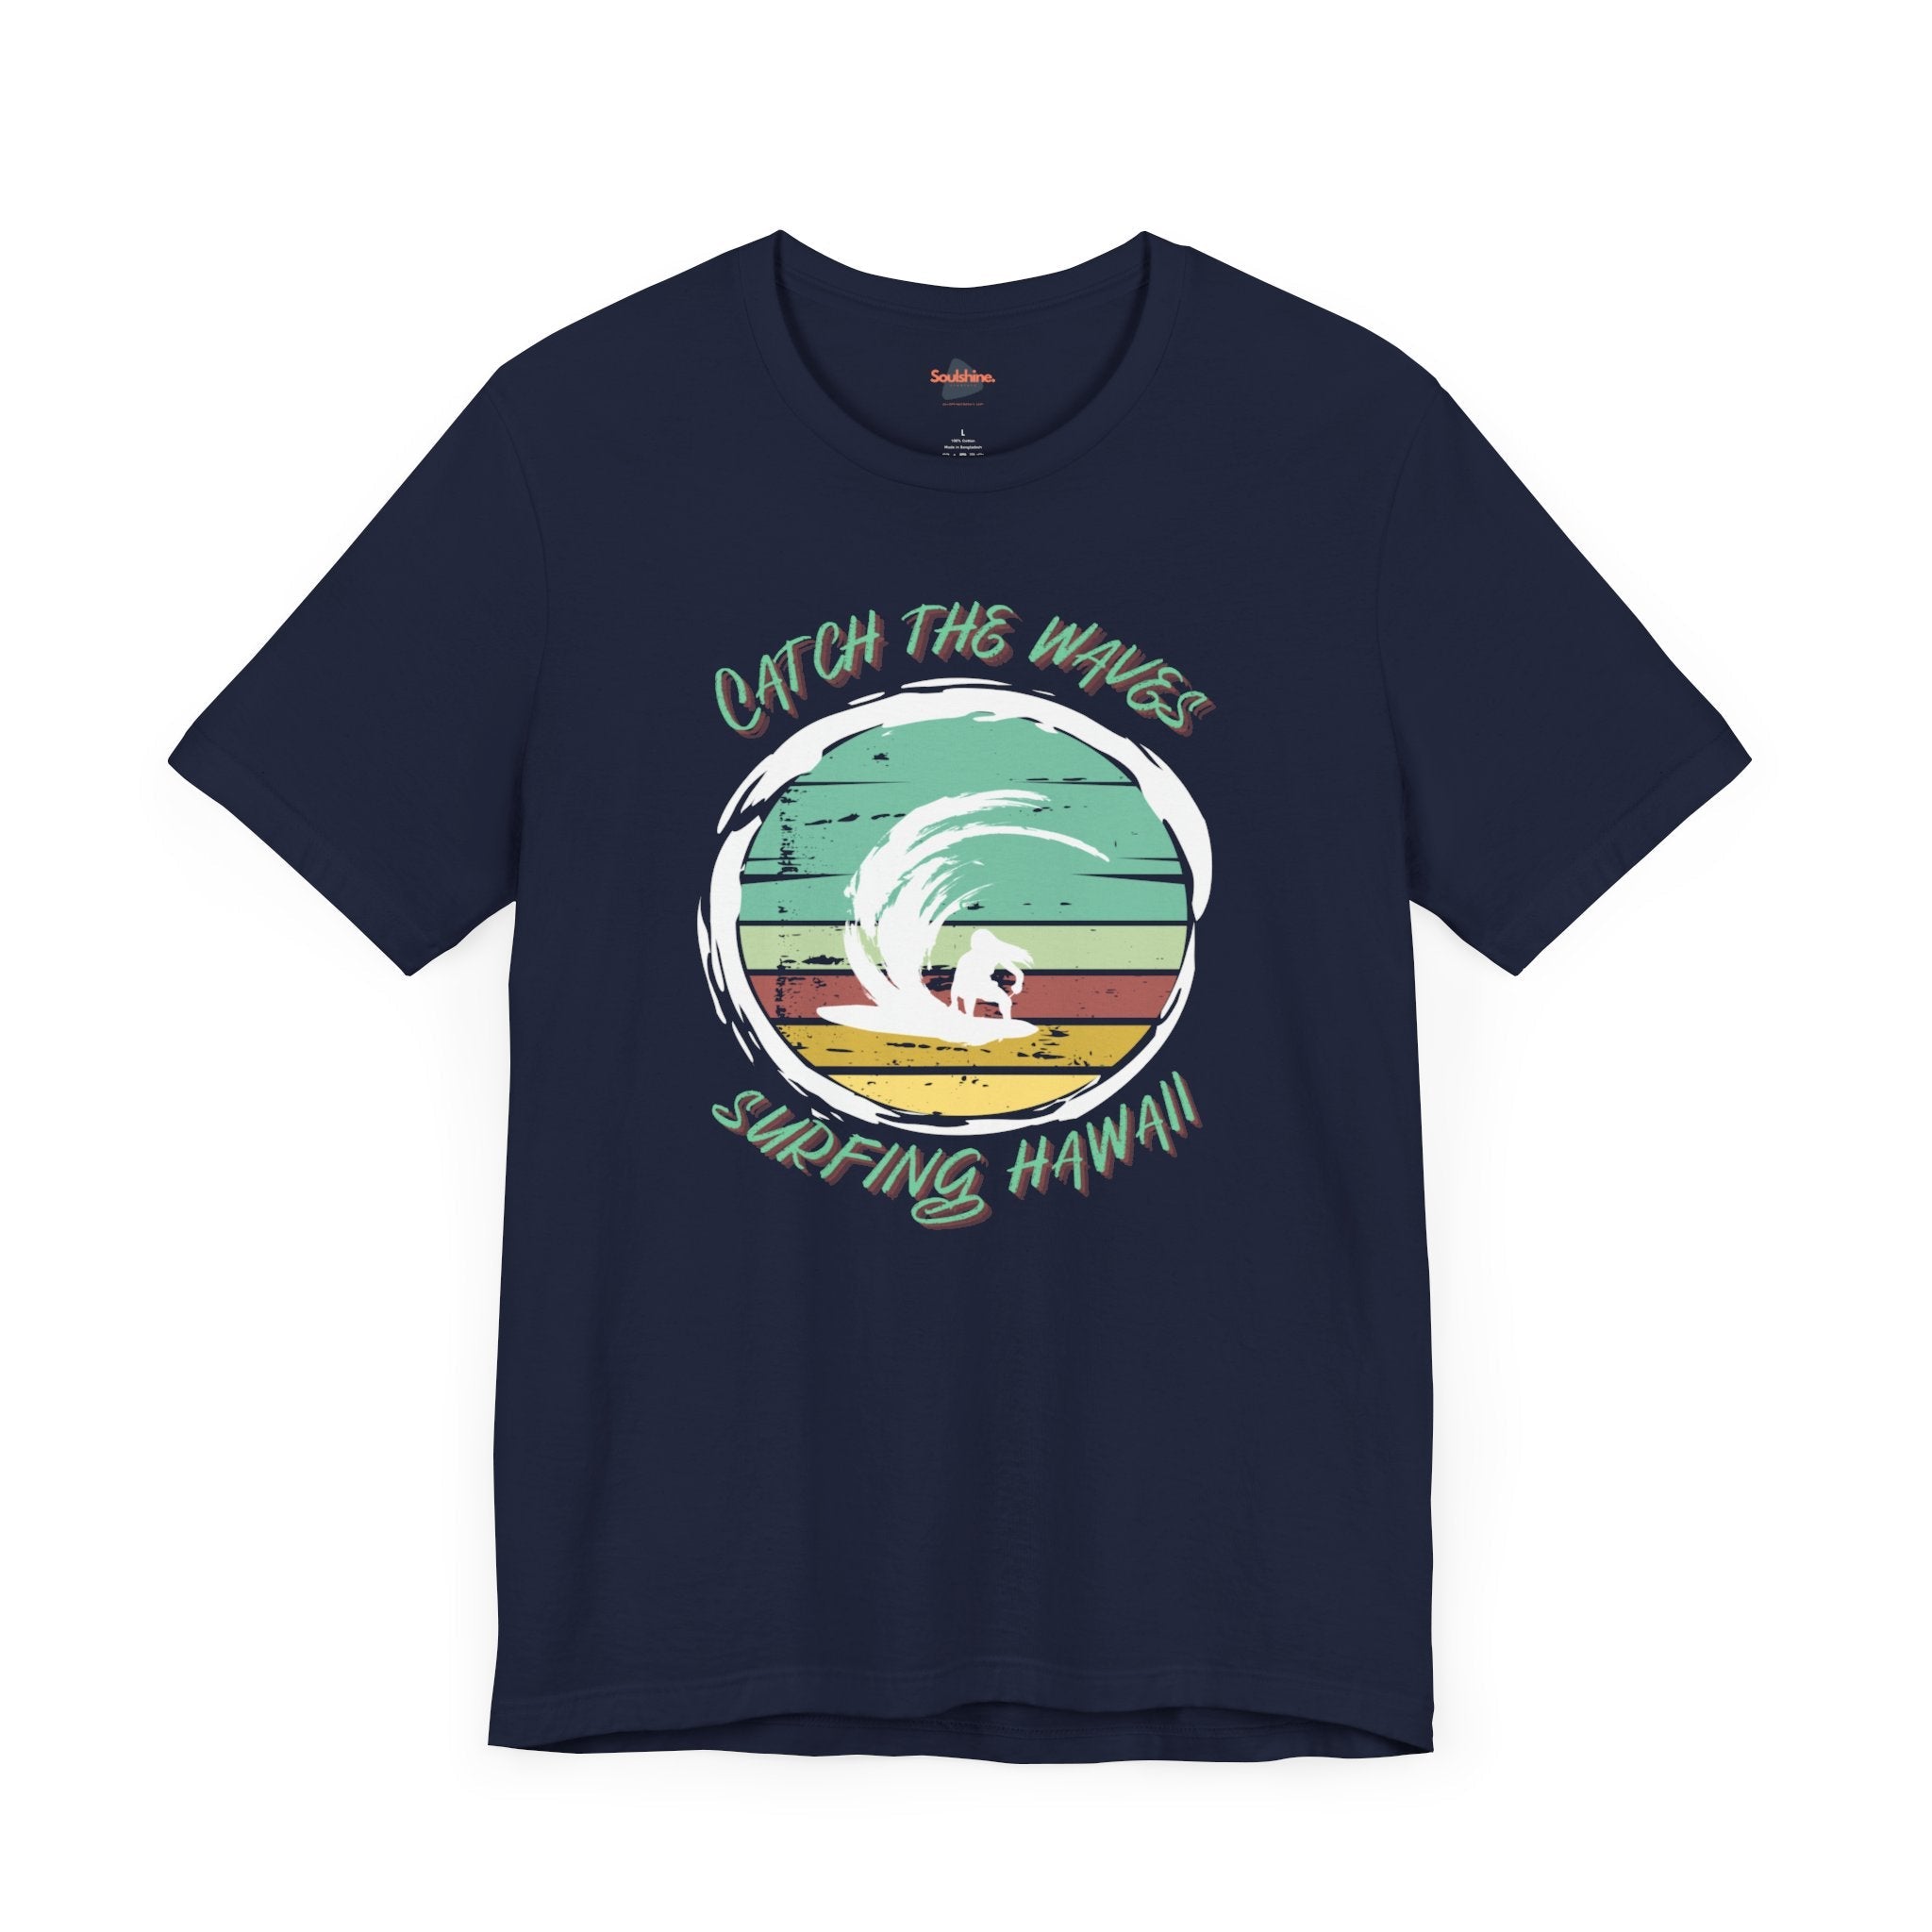 Navy Surfing T-Shirt with Logo - Unisex Jersey Short Sleeve Tee - Direct-to-Garment Printed Item